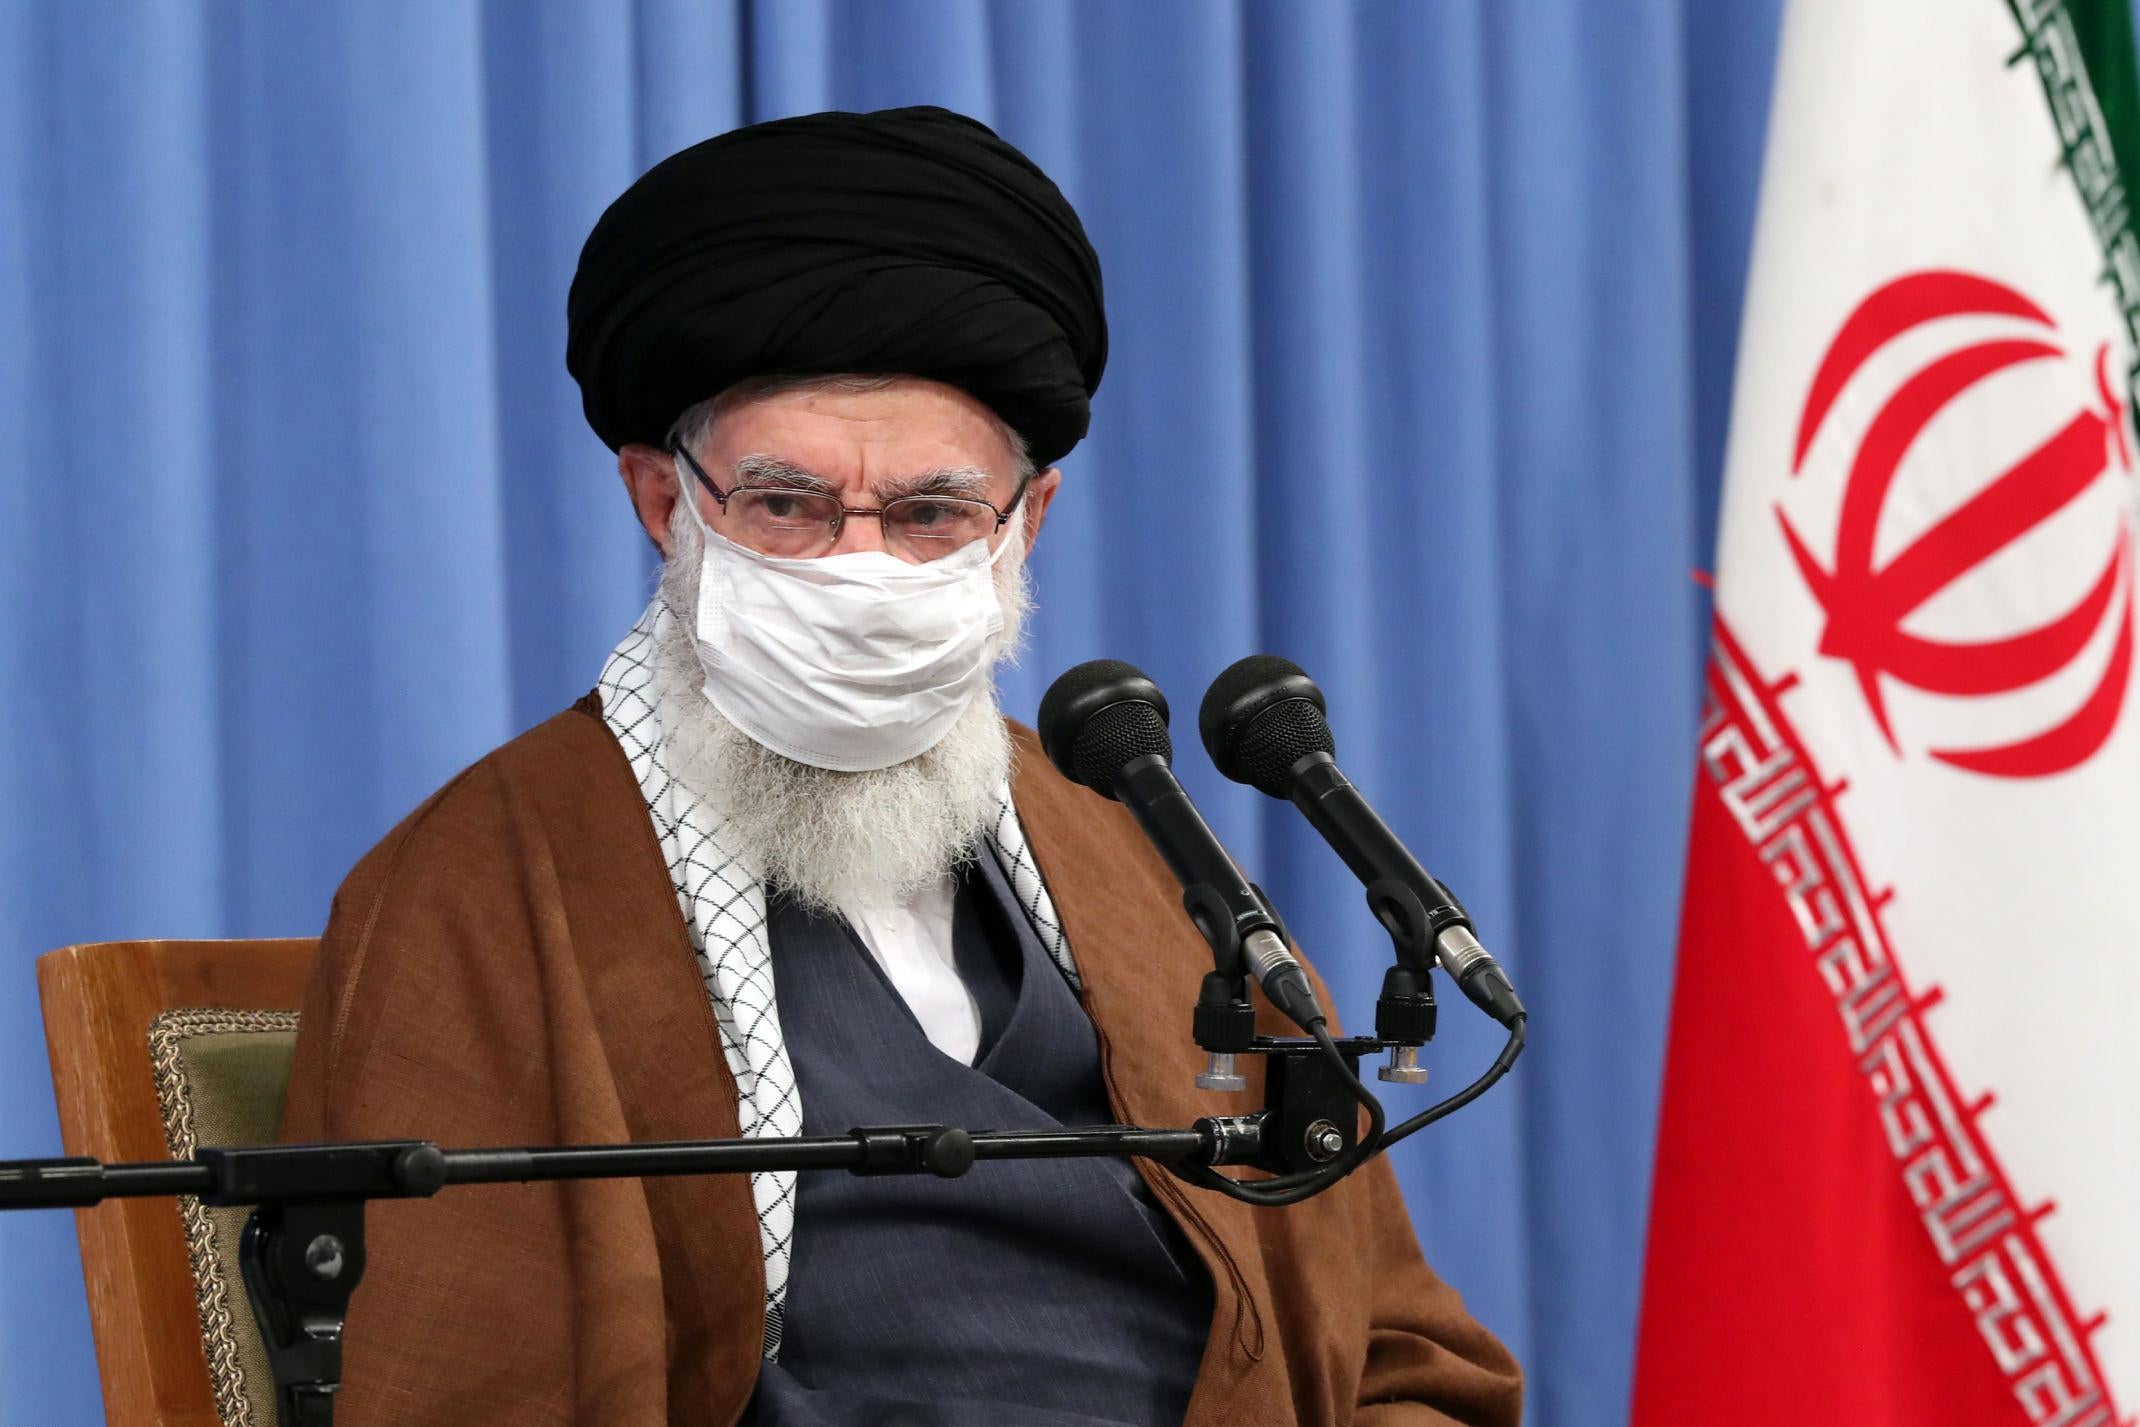 Khamenei, wearing a mask, sits at a mic with an Iranian flag to the side